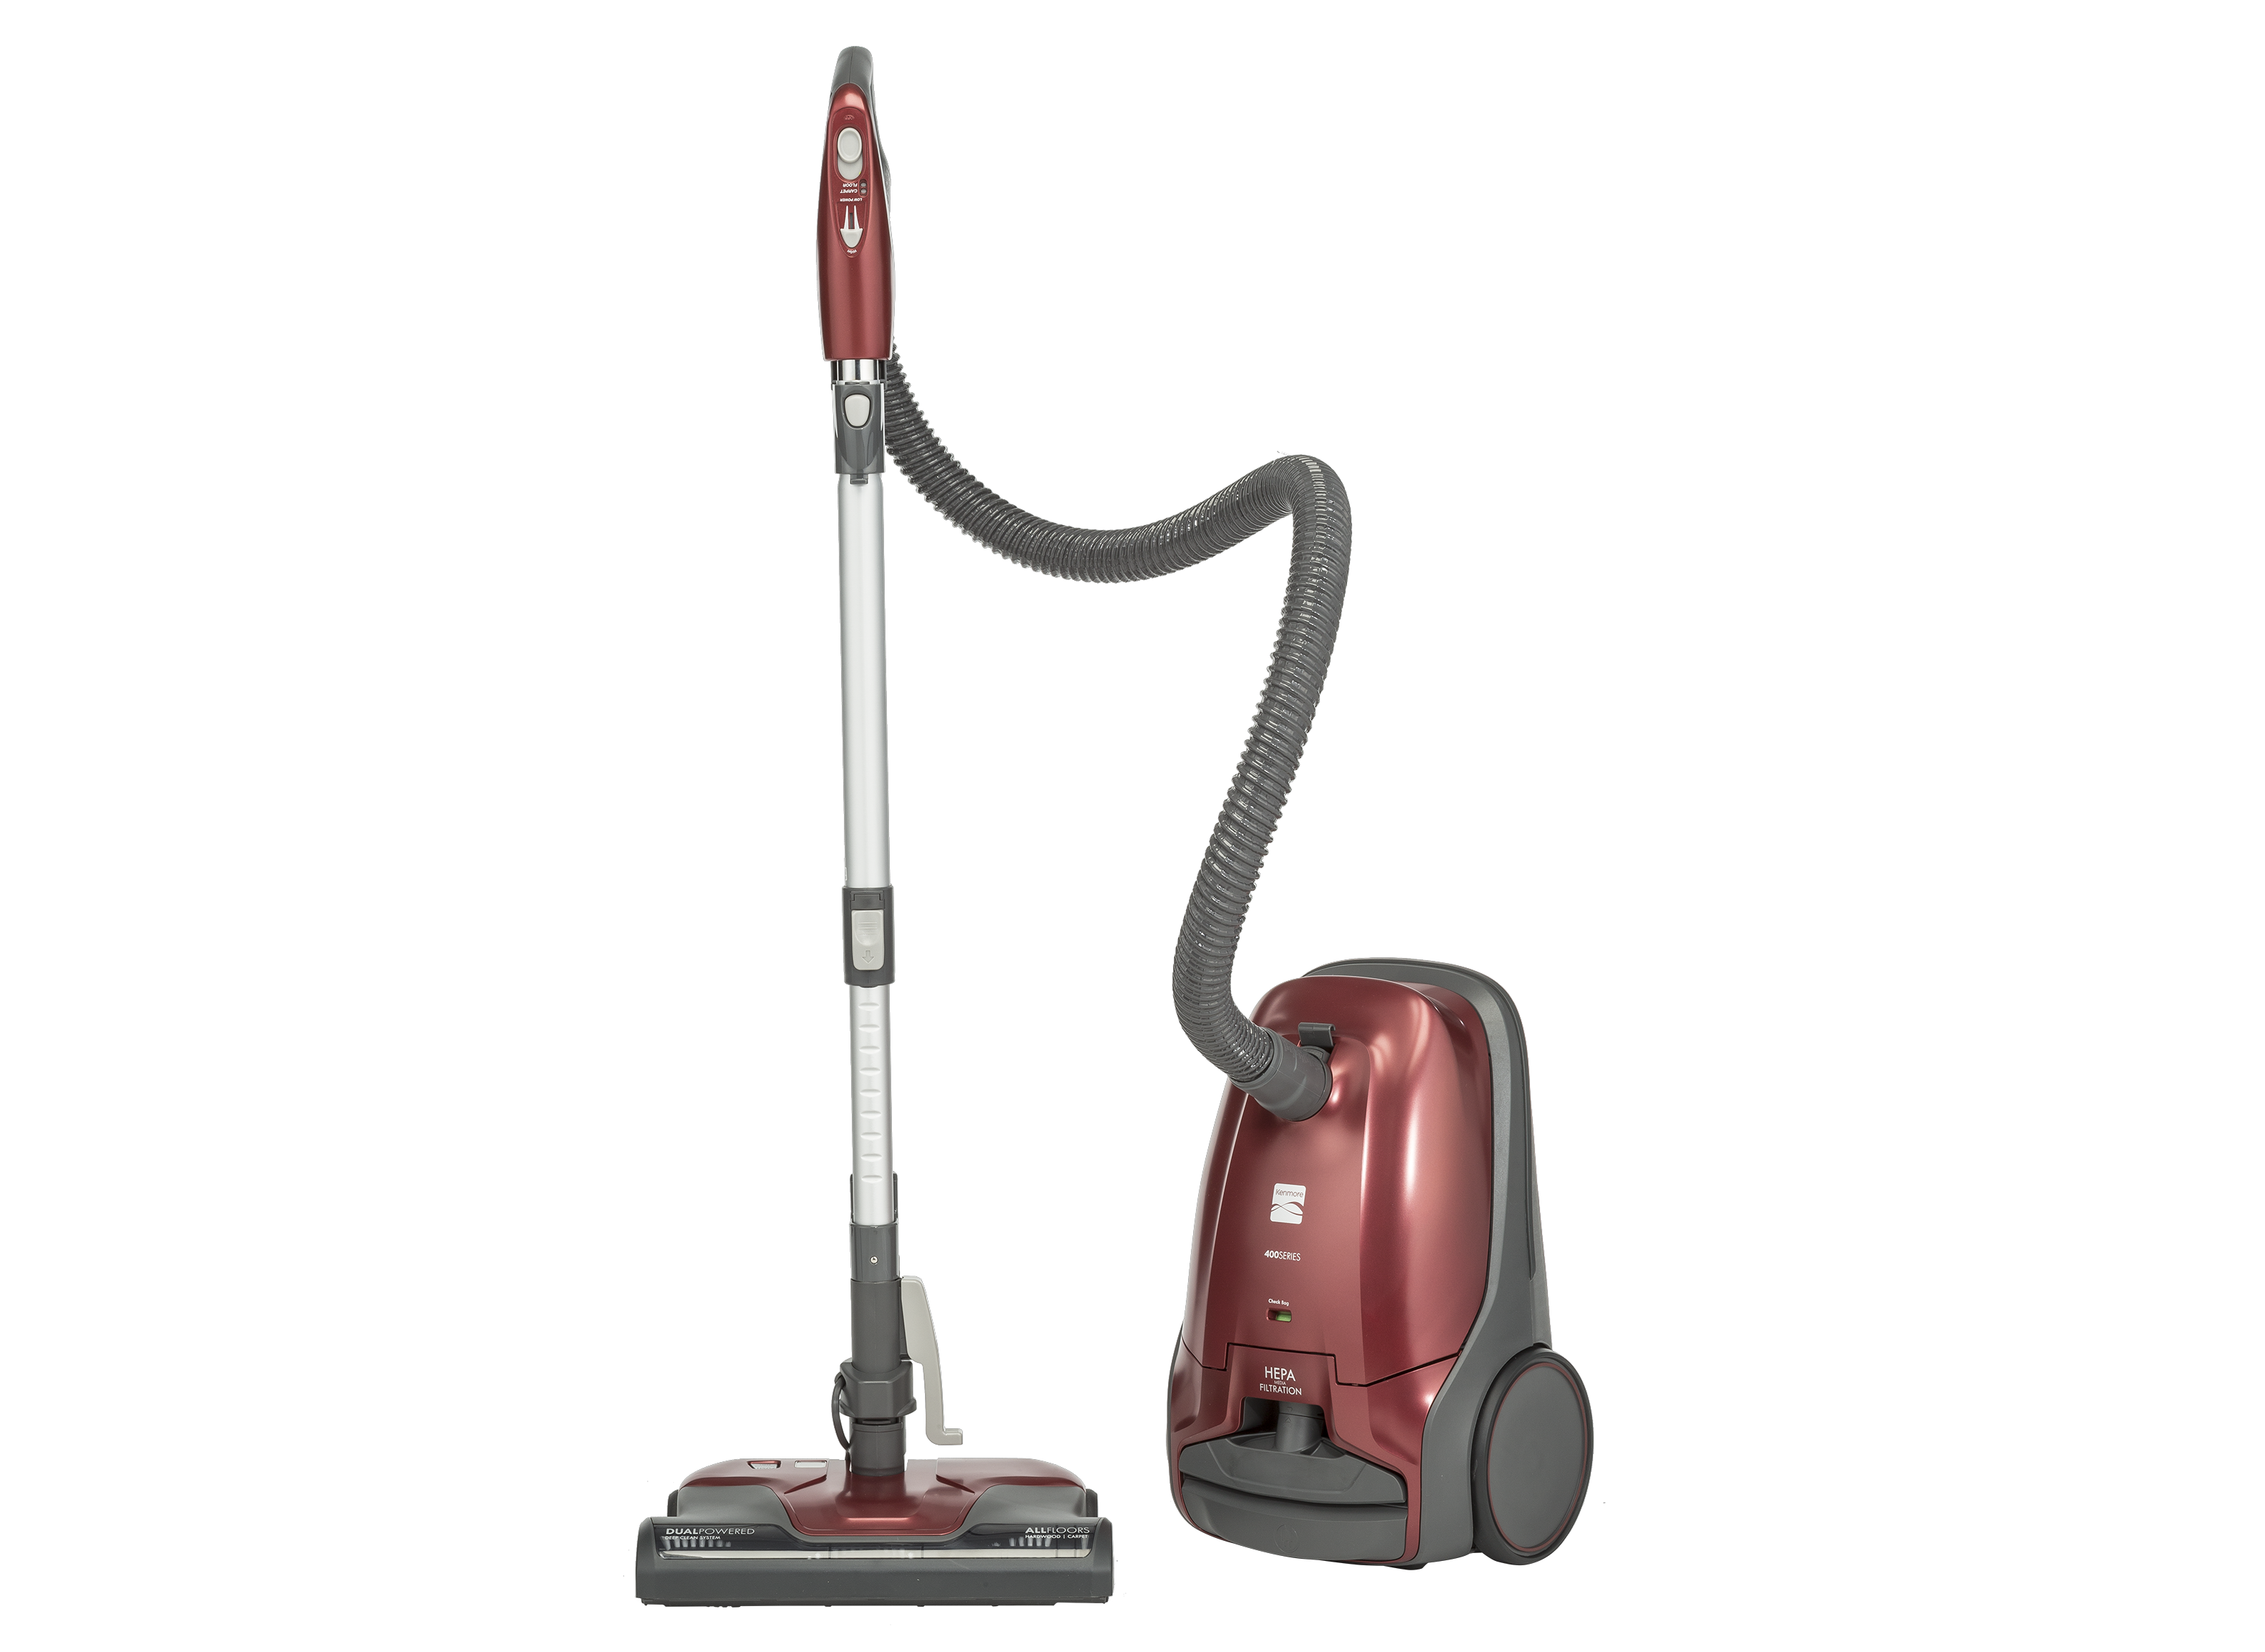 New Kenmore 81414 400 Series Bagged Canister Vacuum Cleaner w/ HEPA Filter Red 